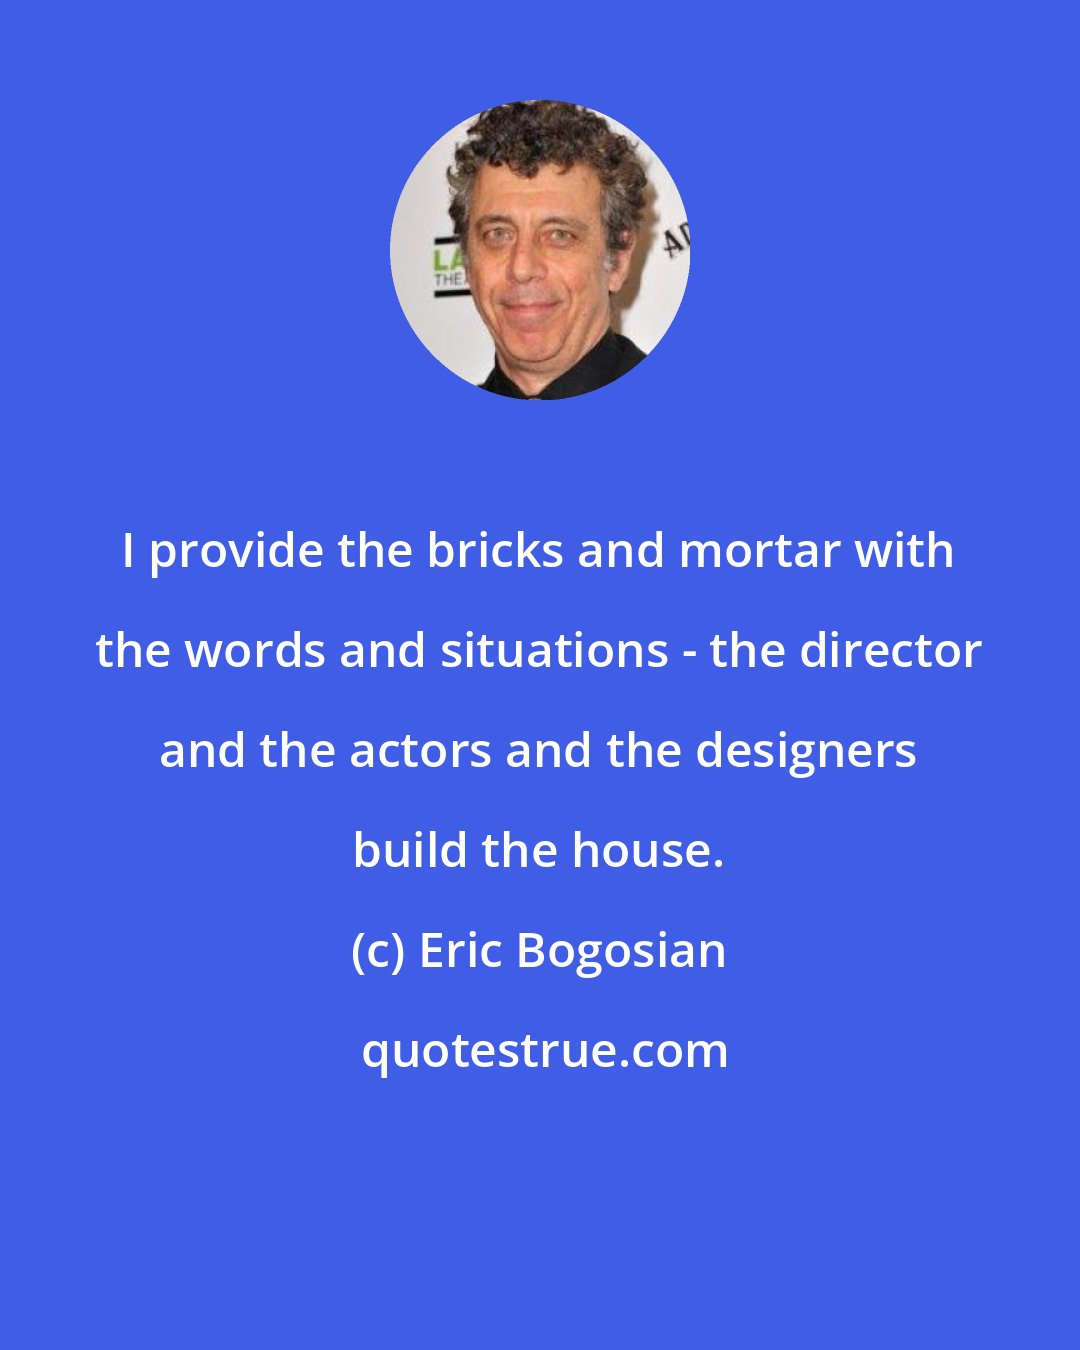 Eric Bogosian: I provide the bricks and mortar with the words and situations - the director and the actors and the designers build the house.